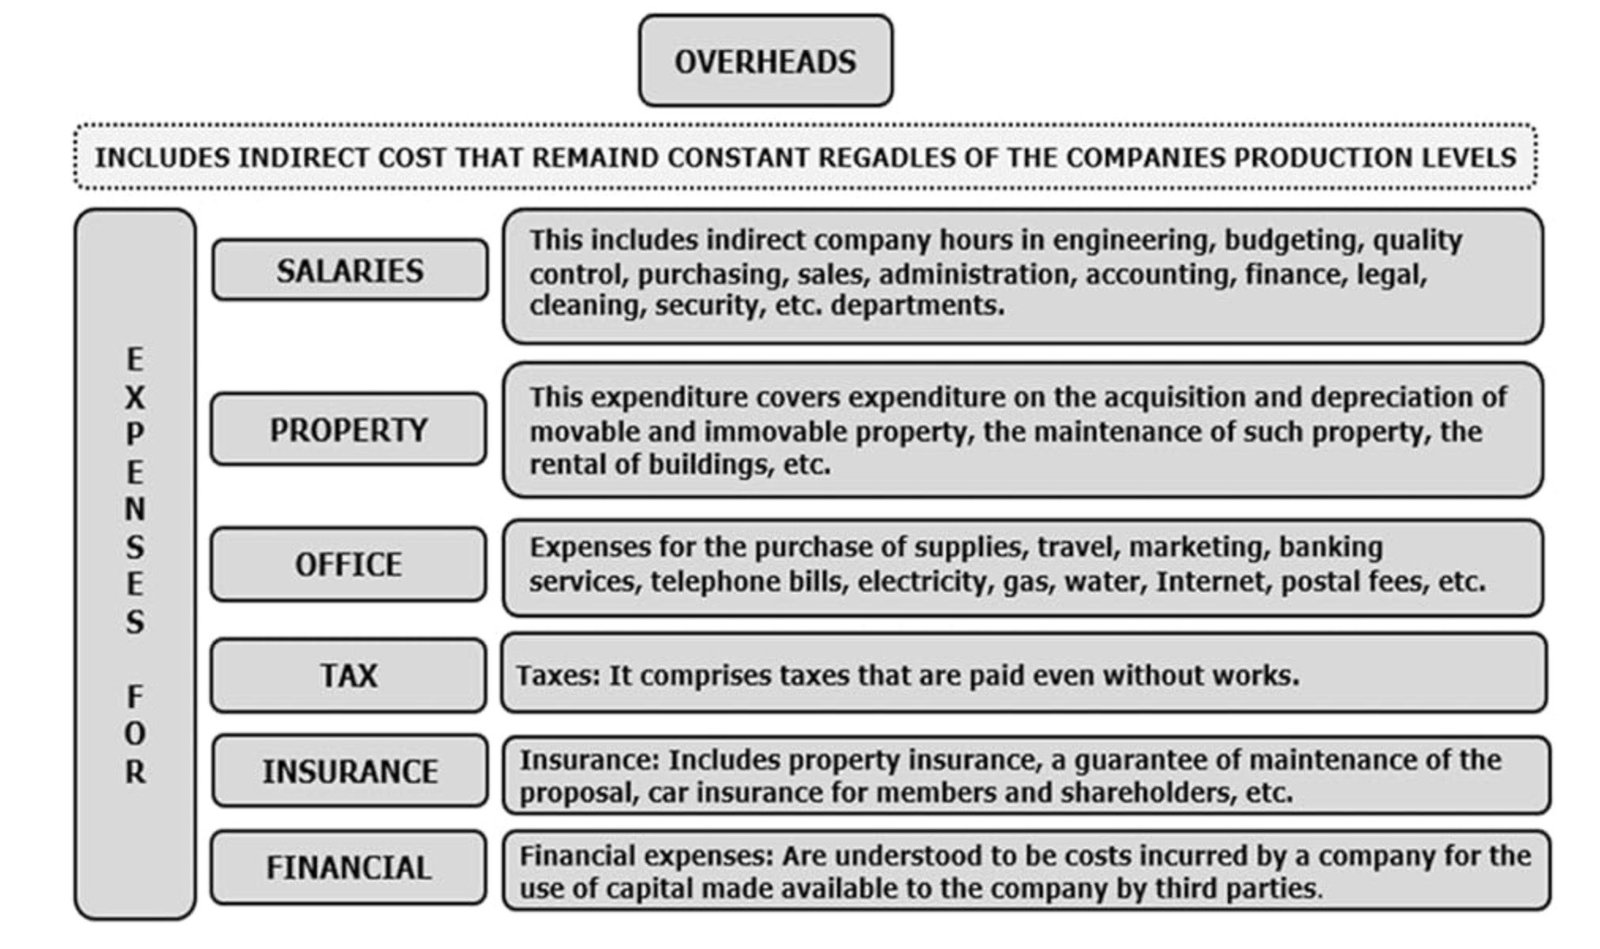  The image displays a summary prepared by the author regarding typical general expenses for construction and/or assembly projects.